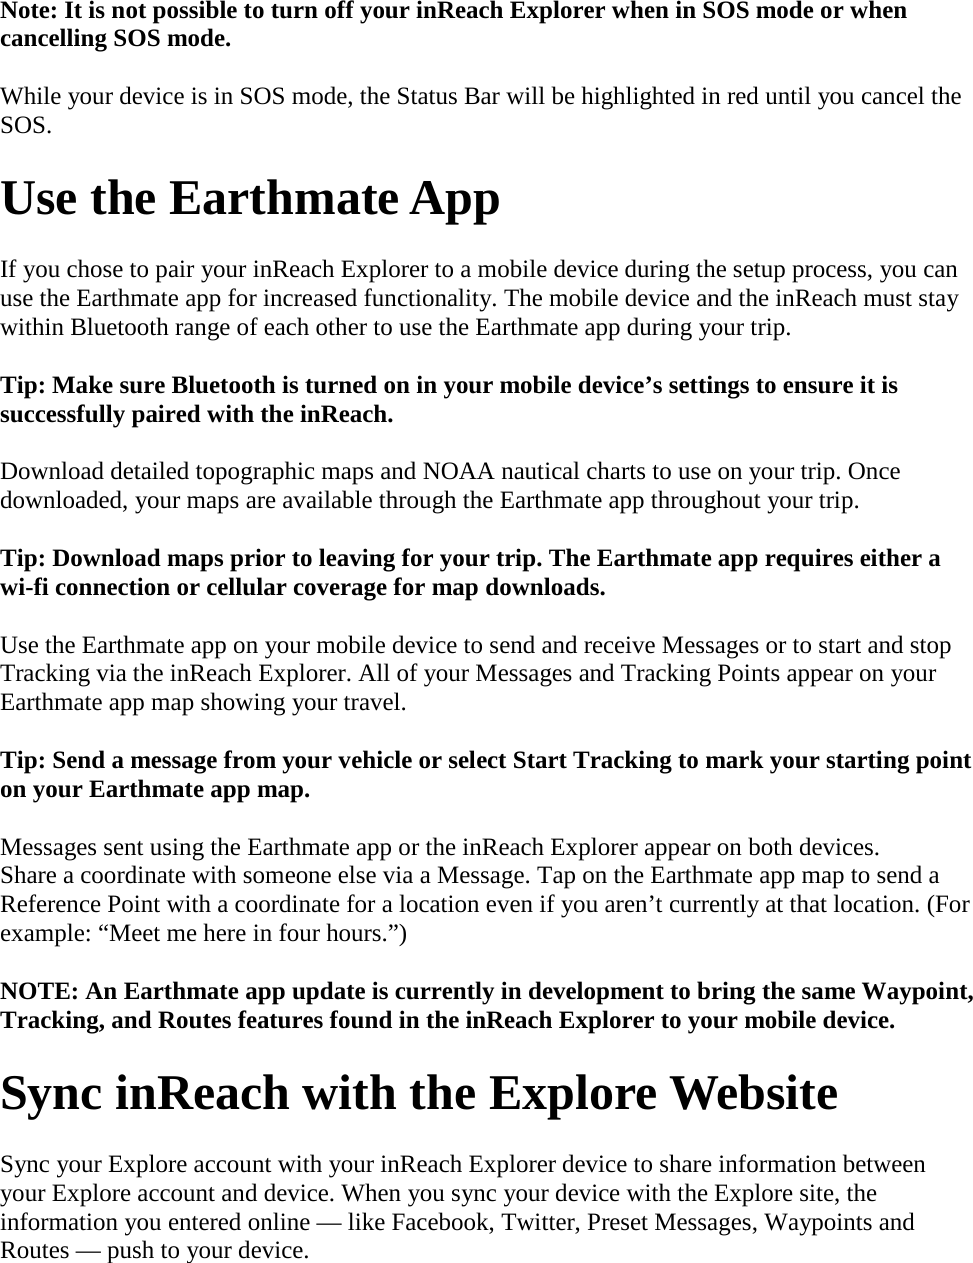 Note: It is not possible to turn off your inReach Explorer when in SOS mode or when cancelling SOS mode. While your device is in SOS mode, the Status Bar will be highlighted in red until you cancel the SOS.  Use the Earthmate App If you chose to pair your inReach Explorer to a mobile device during the setup process, you can use the Earthmate app for increased functionality. The mobile device and the inReach must stay within Bluetooth range of each other to use the Earthmate app during your trip. Tip: Make sure Bluetooth is turned on in your mobile device’s settings to ensure it is successfully paired with the inReach. Download detailed topographic maps and NOAA nautical charts to use on your trip. Once downloaded, your maps are available through the Earthmate app throughout your trip. Tip: Download maps prior to leaving for your trip. The Earthmate app requires either a wi-fi connection or cellular coverage for map downloads.  Use the Earthmate app on your mobile device to send and receive Messages or to start and stop Tracking via the inReach Explorer. All of your Messages and Tracking Points appear on your Earthmate app map showing your travel. Tip: Send a message from your vehicle or select Start Tracking to mark your starting point on your Earthmate app map. Messages sent using the Earthmate app or the inReach Explorer appear on both devices. Share a coordinate with someone else via a Message. Tap on the Earthmate app map to send a Reference Point with a coordinate for a location even if you aren’t currently at that location. (For example: “Meet me here in four hours.”) NOTE: An Earthmate app update is currently in development to bring the same Waypoint, Tracking, and Routes features found in the inReach Explorer to your mobile device. Sync inReach with the Explore Website Sync your Explore account with your inReach Explorer device to share information between your Explore account and device. When you sync your device with the Explore site, the information you entered online — like Facebook, Twitter, Preset Messages, Waypoints and Routes — push to your device. 